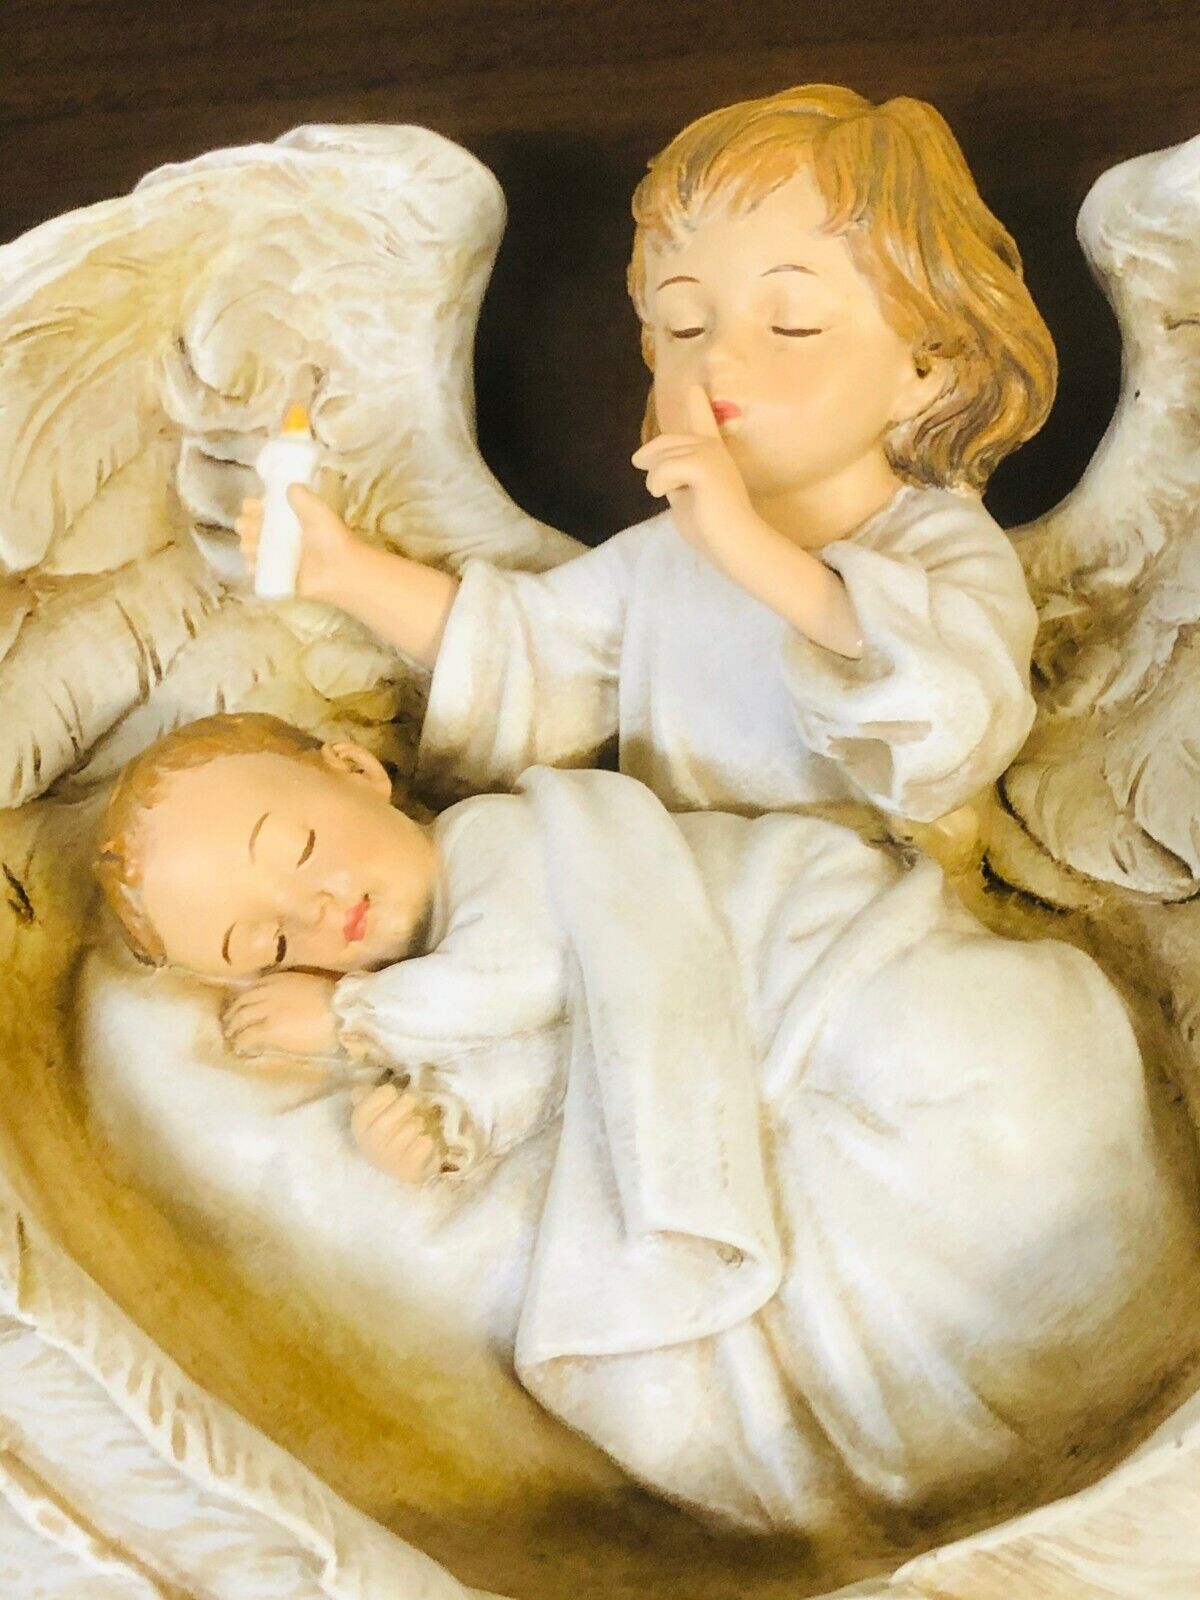 Sleeping Baby in Angel Wings Plaque by  Joseph's Studio 11" H, New - Bob and Penny Lord